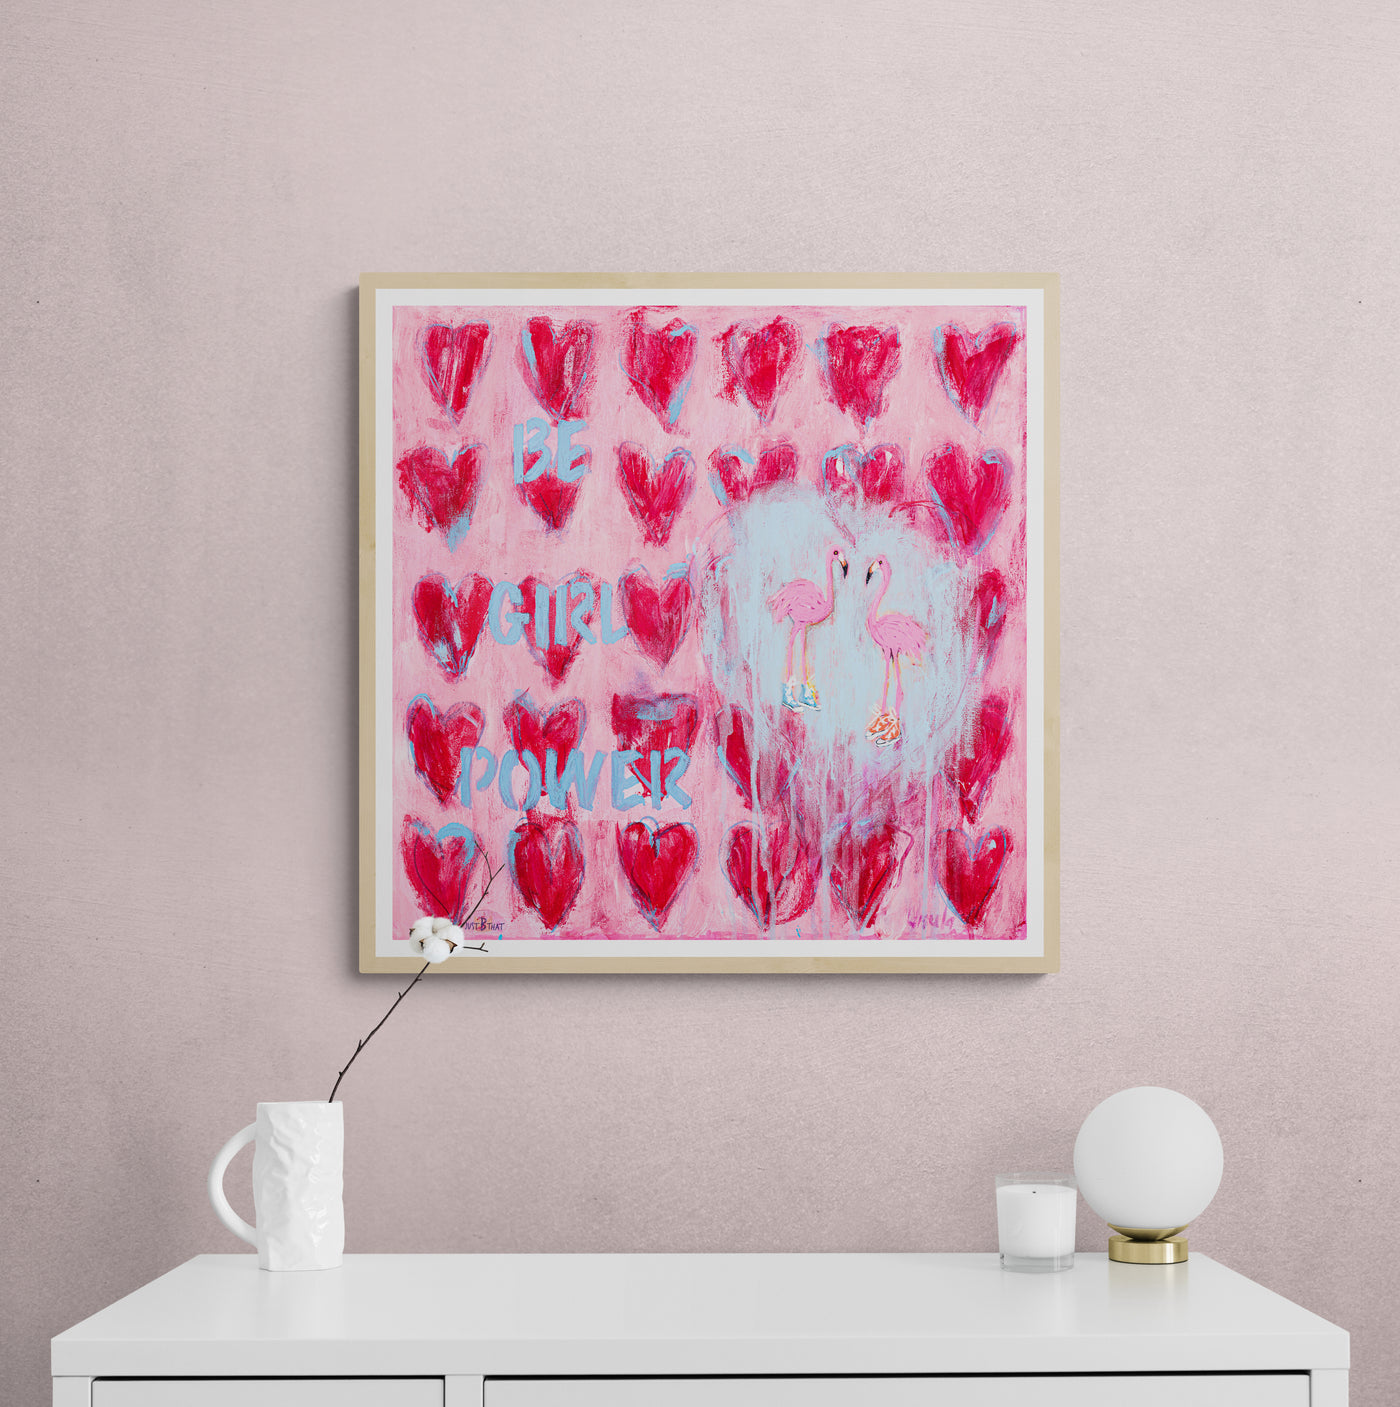 ART PRINT - PINK HEARTS AND GIRL POWER MATCH TOGETHER